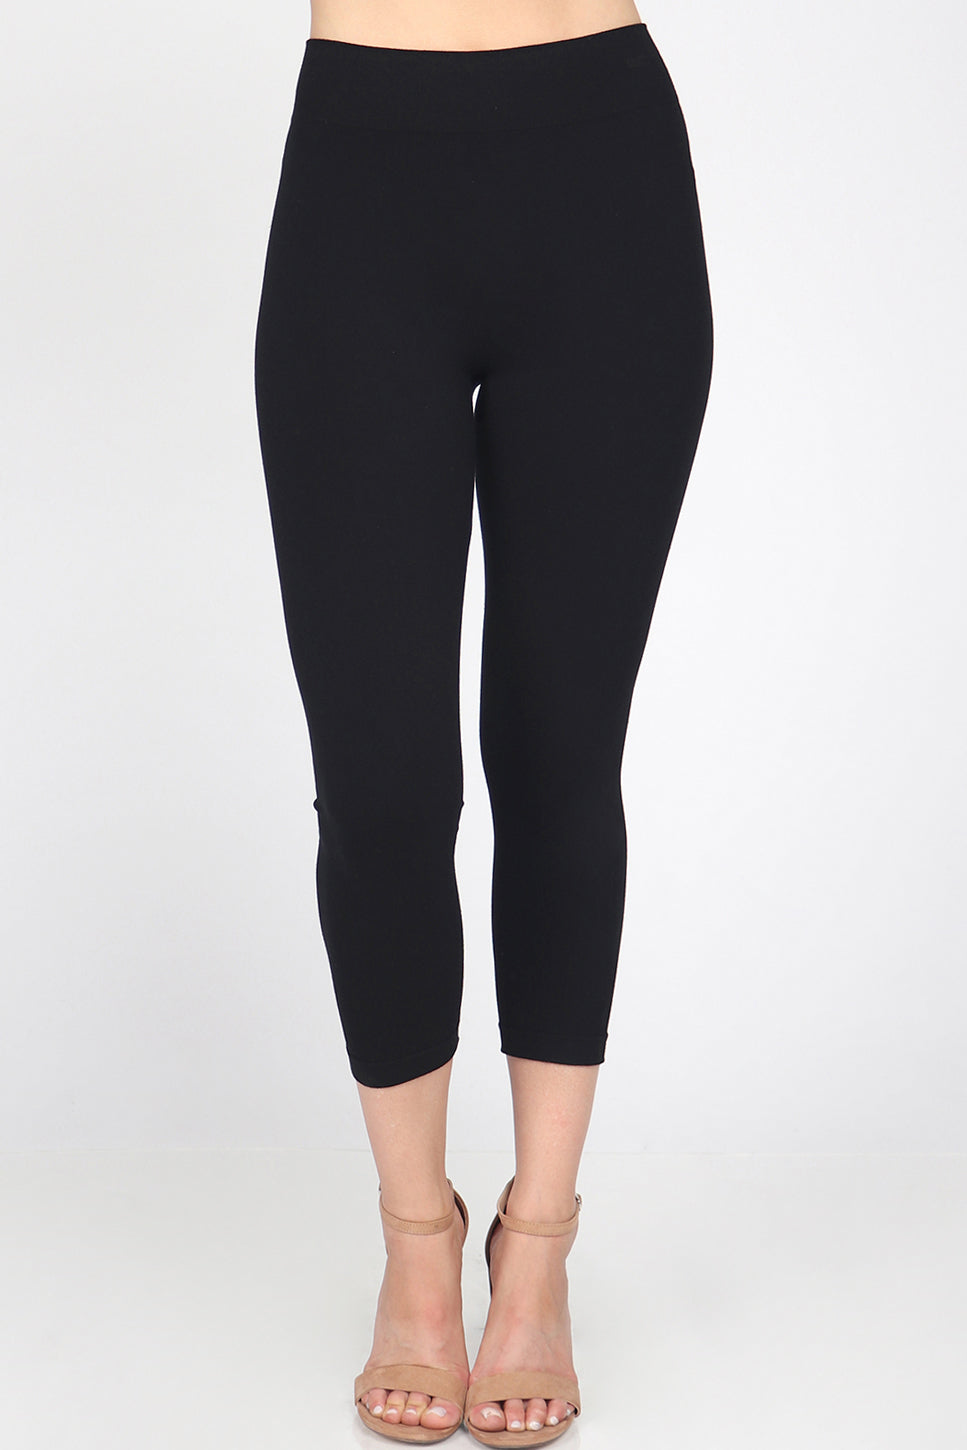 The Cropped Classic Legging